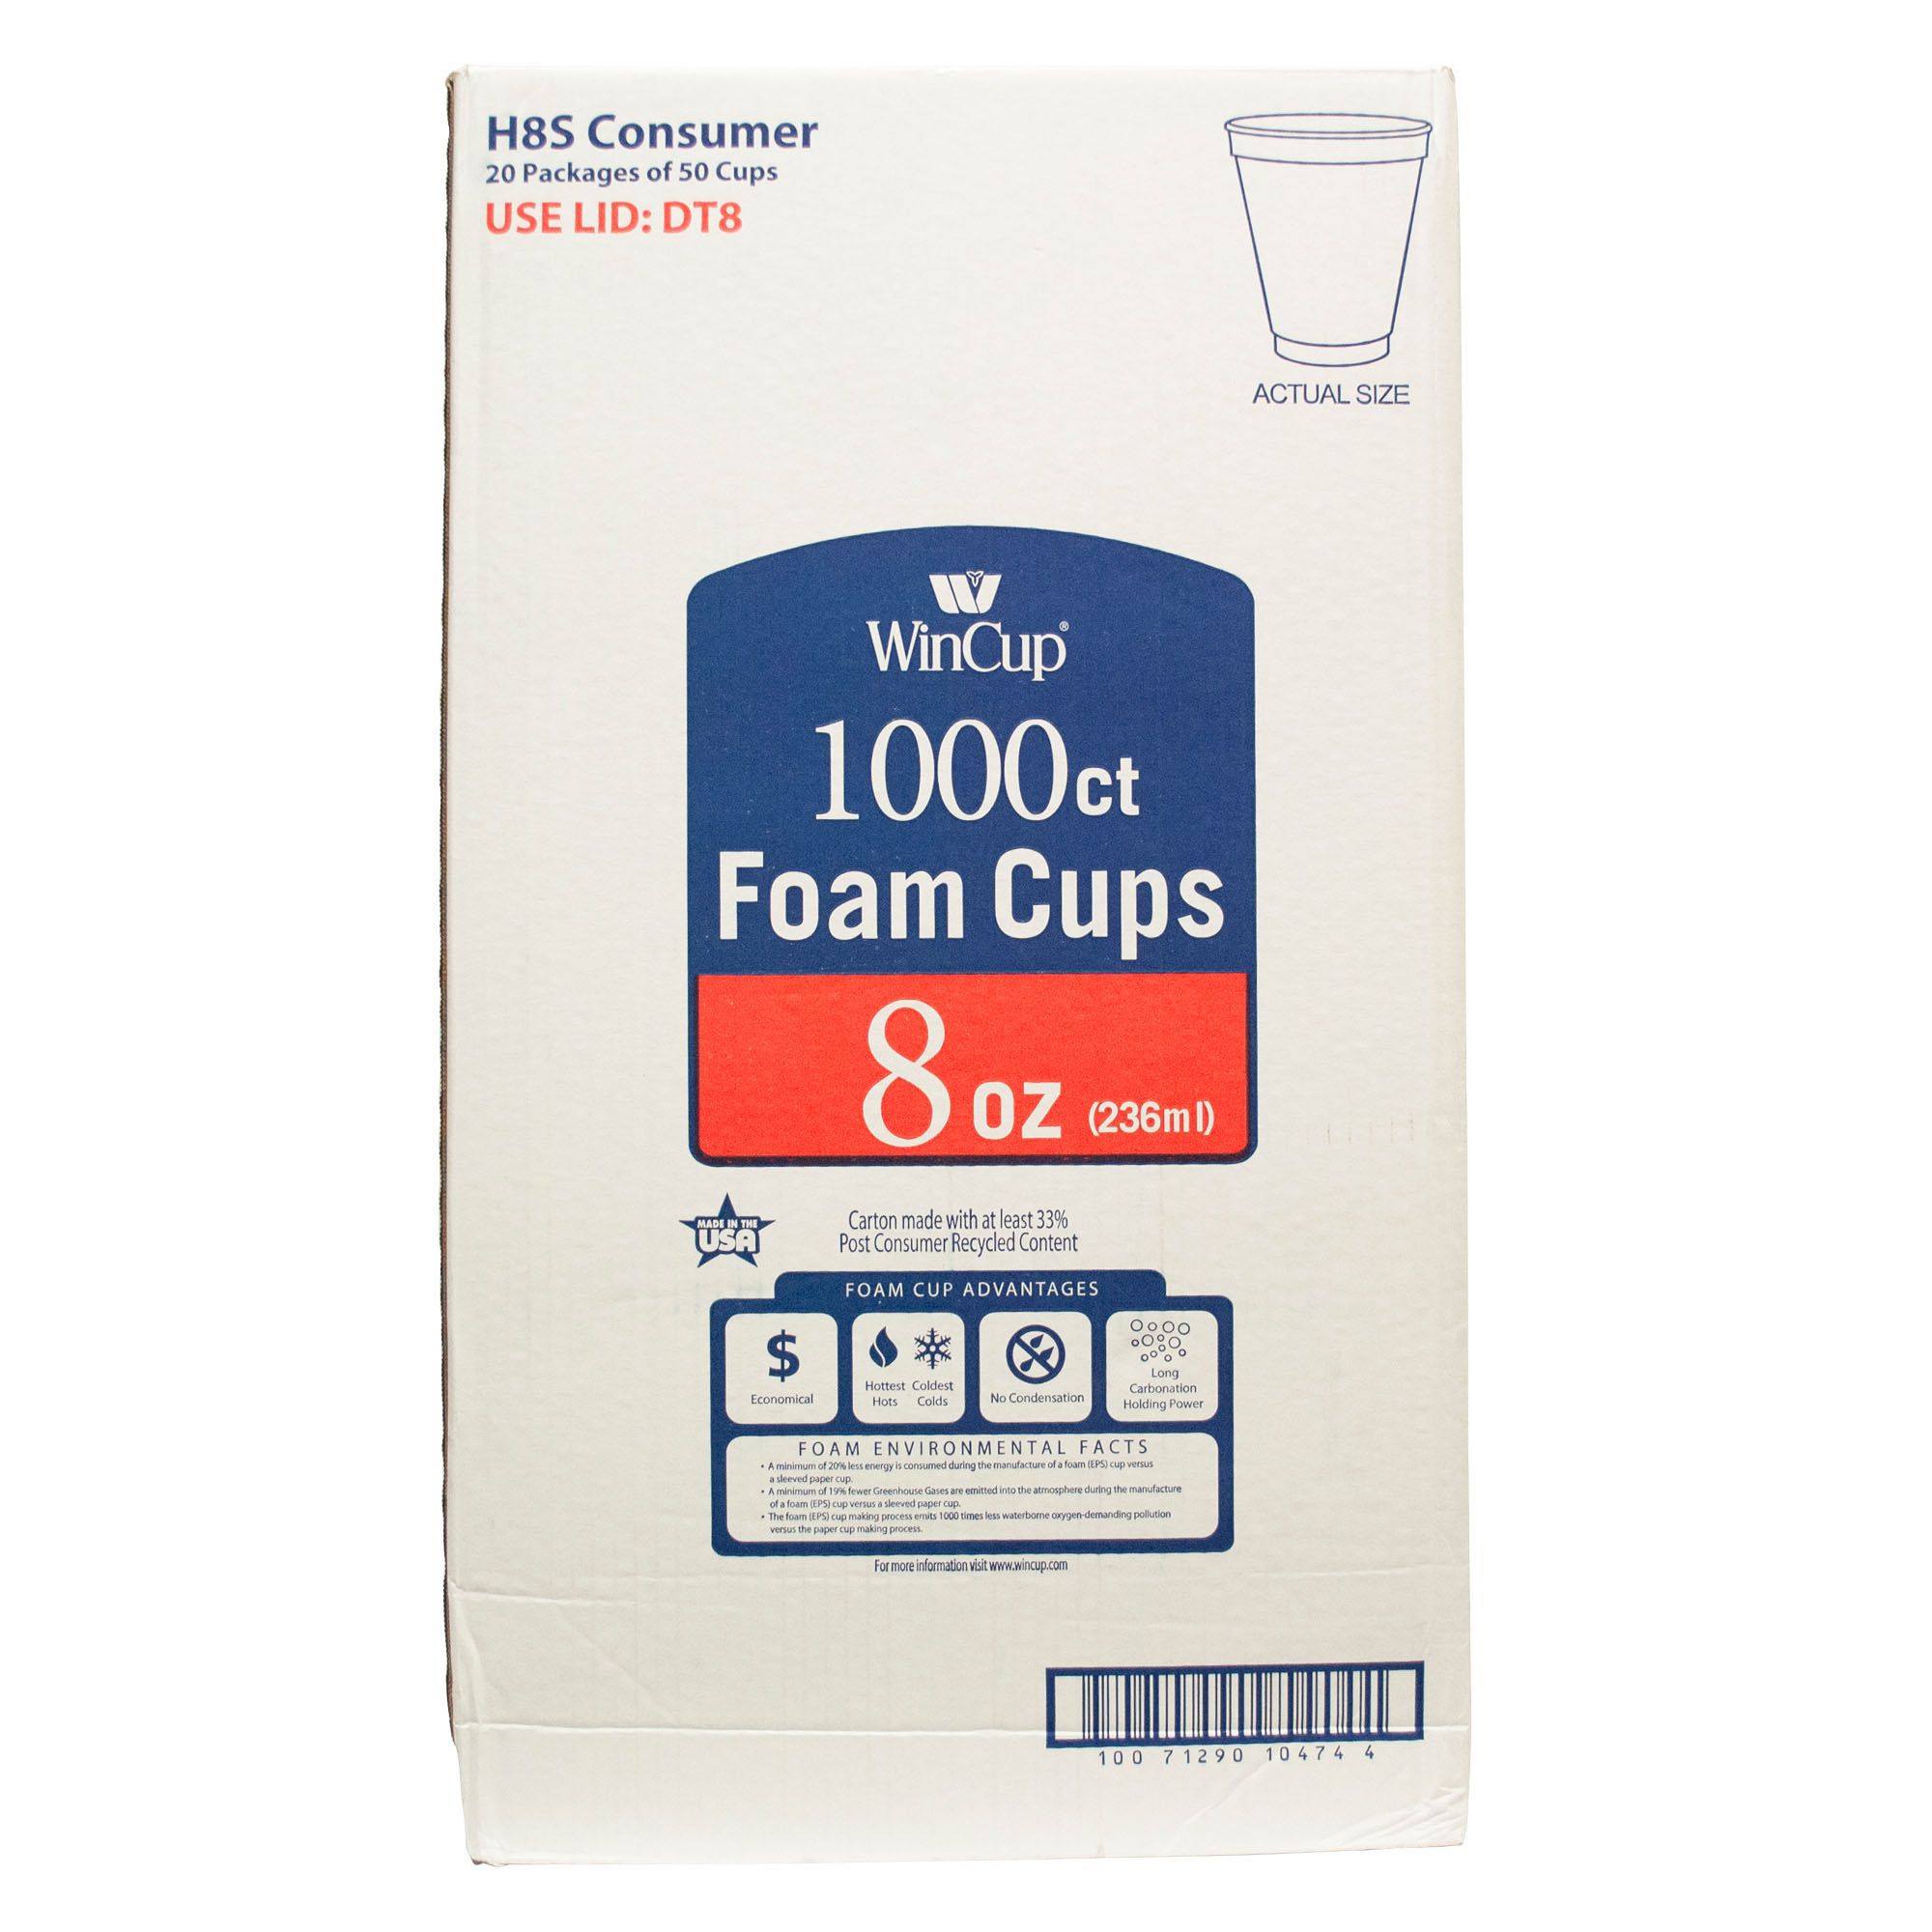 20 oz. Styrofoam Cup 500 pack of Cups